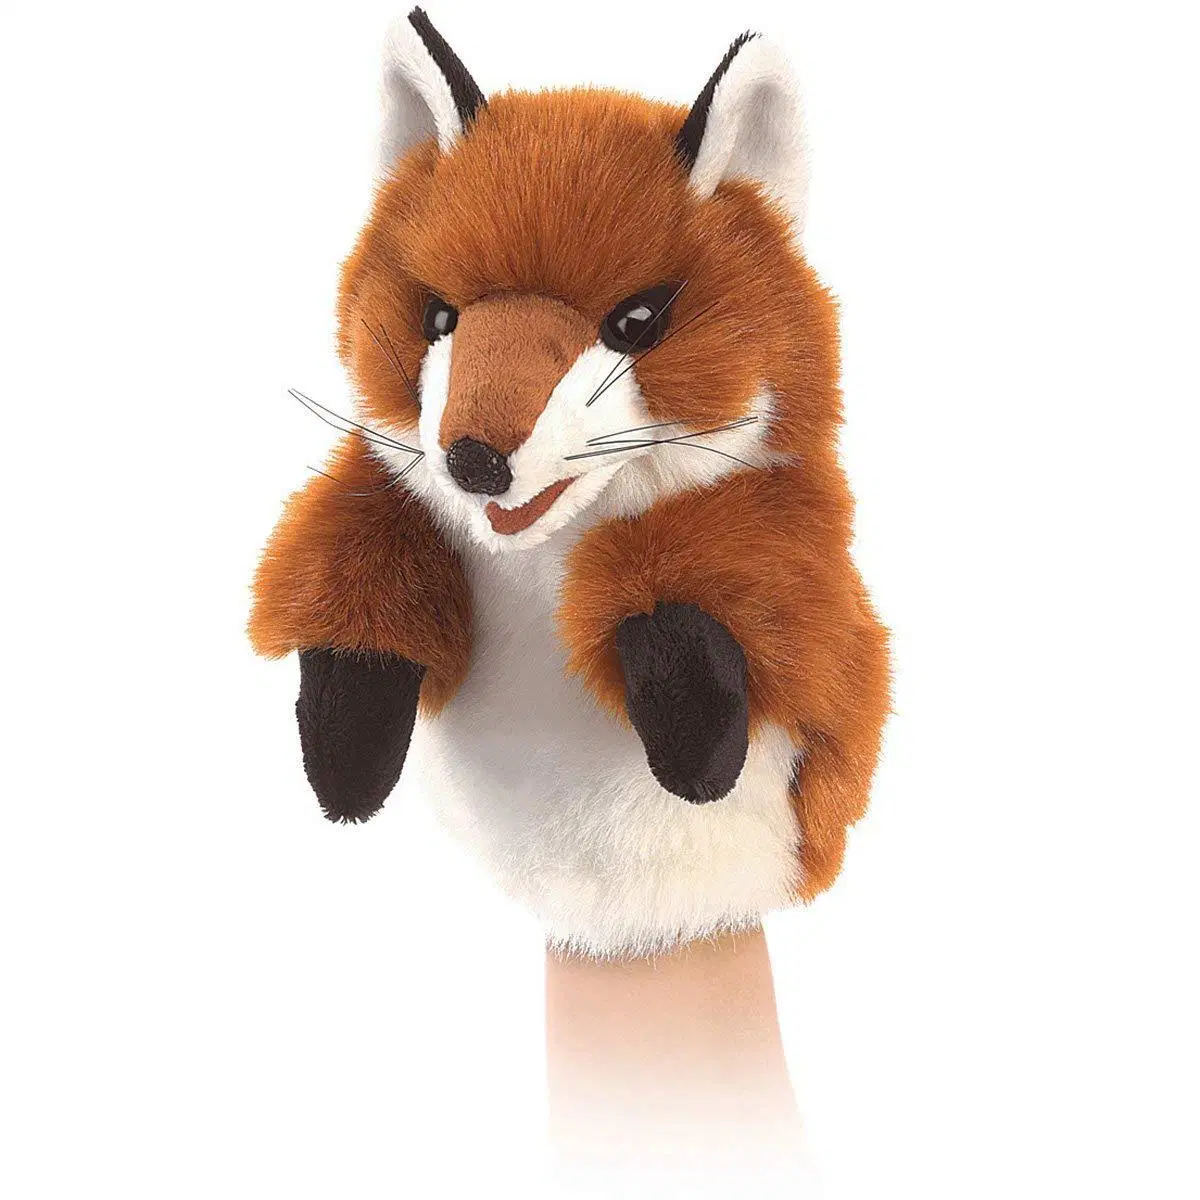 The New Winter Plush Little Fox Puppet Is Suitable for Stage Puppets, Drama, Role-Playing Spoof Toys